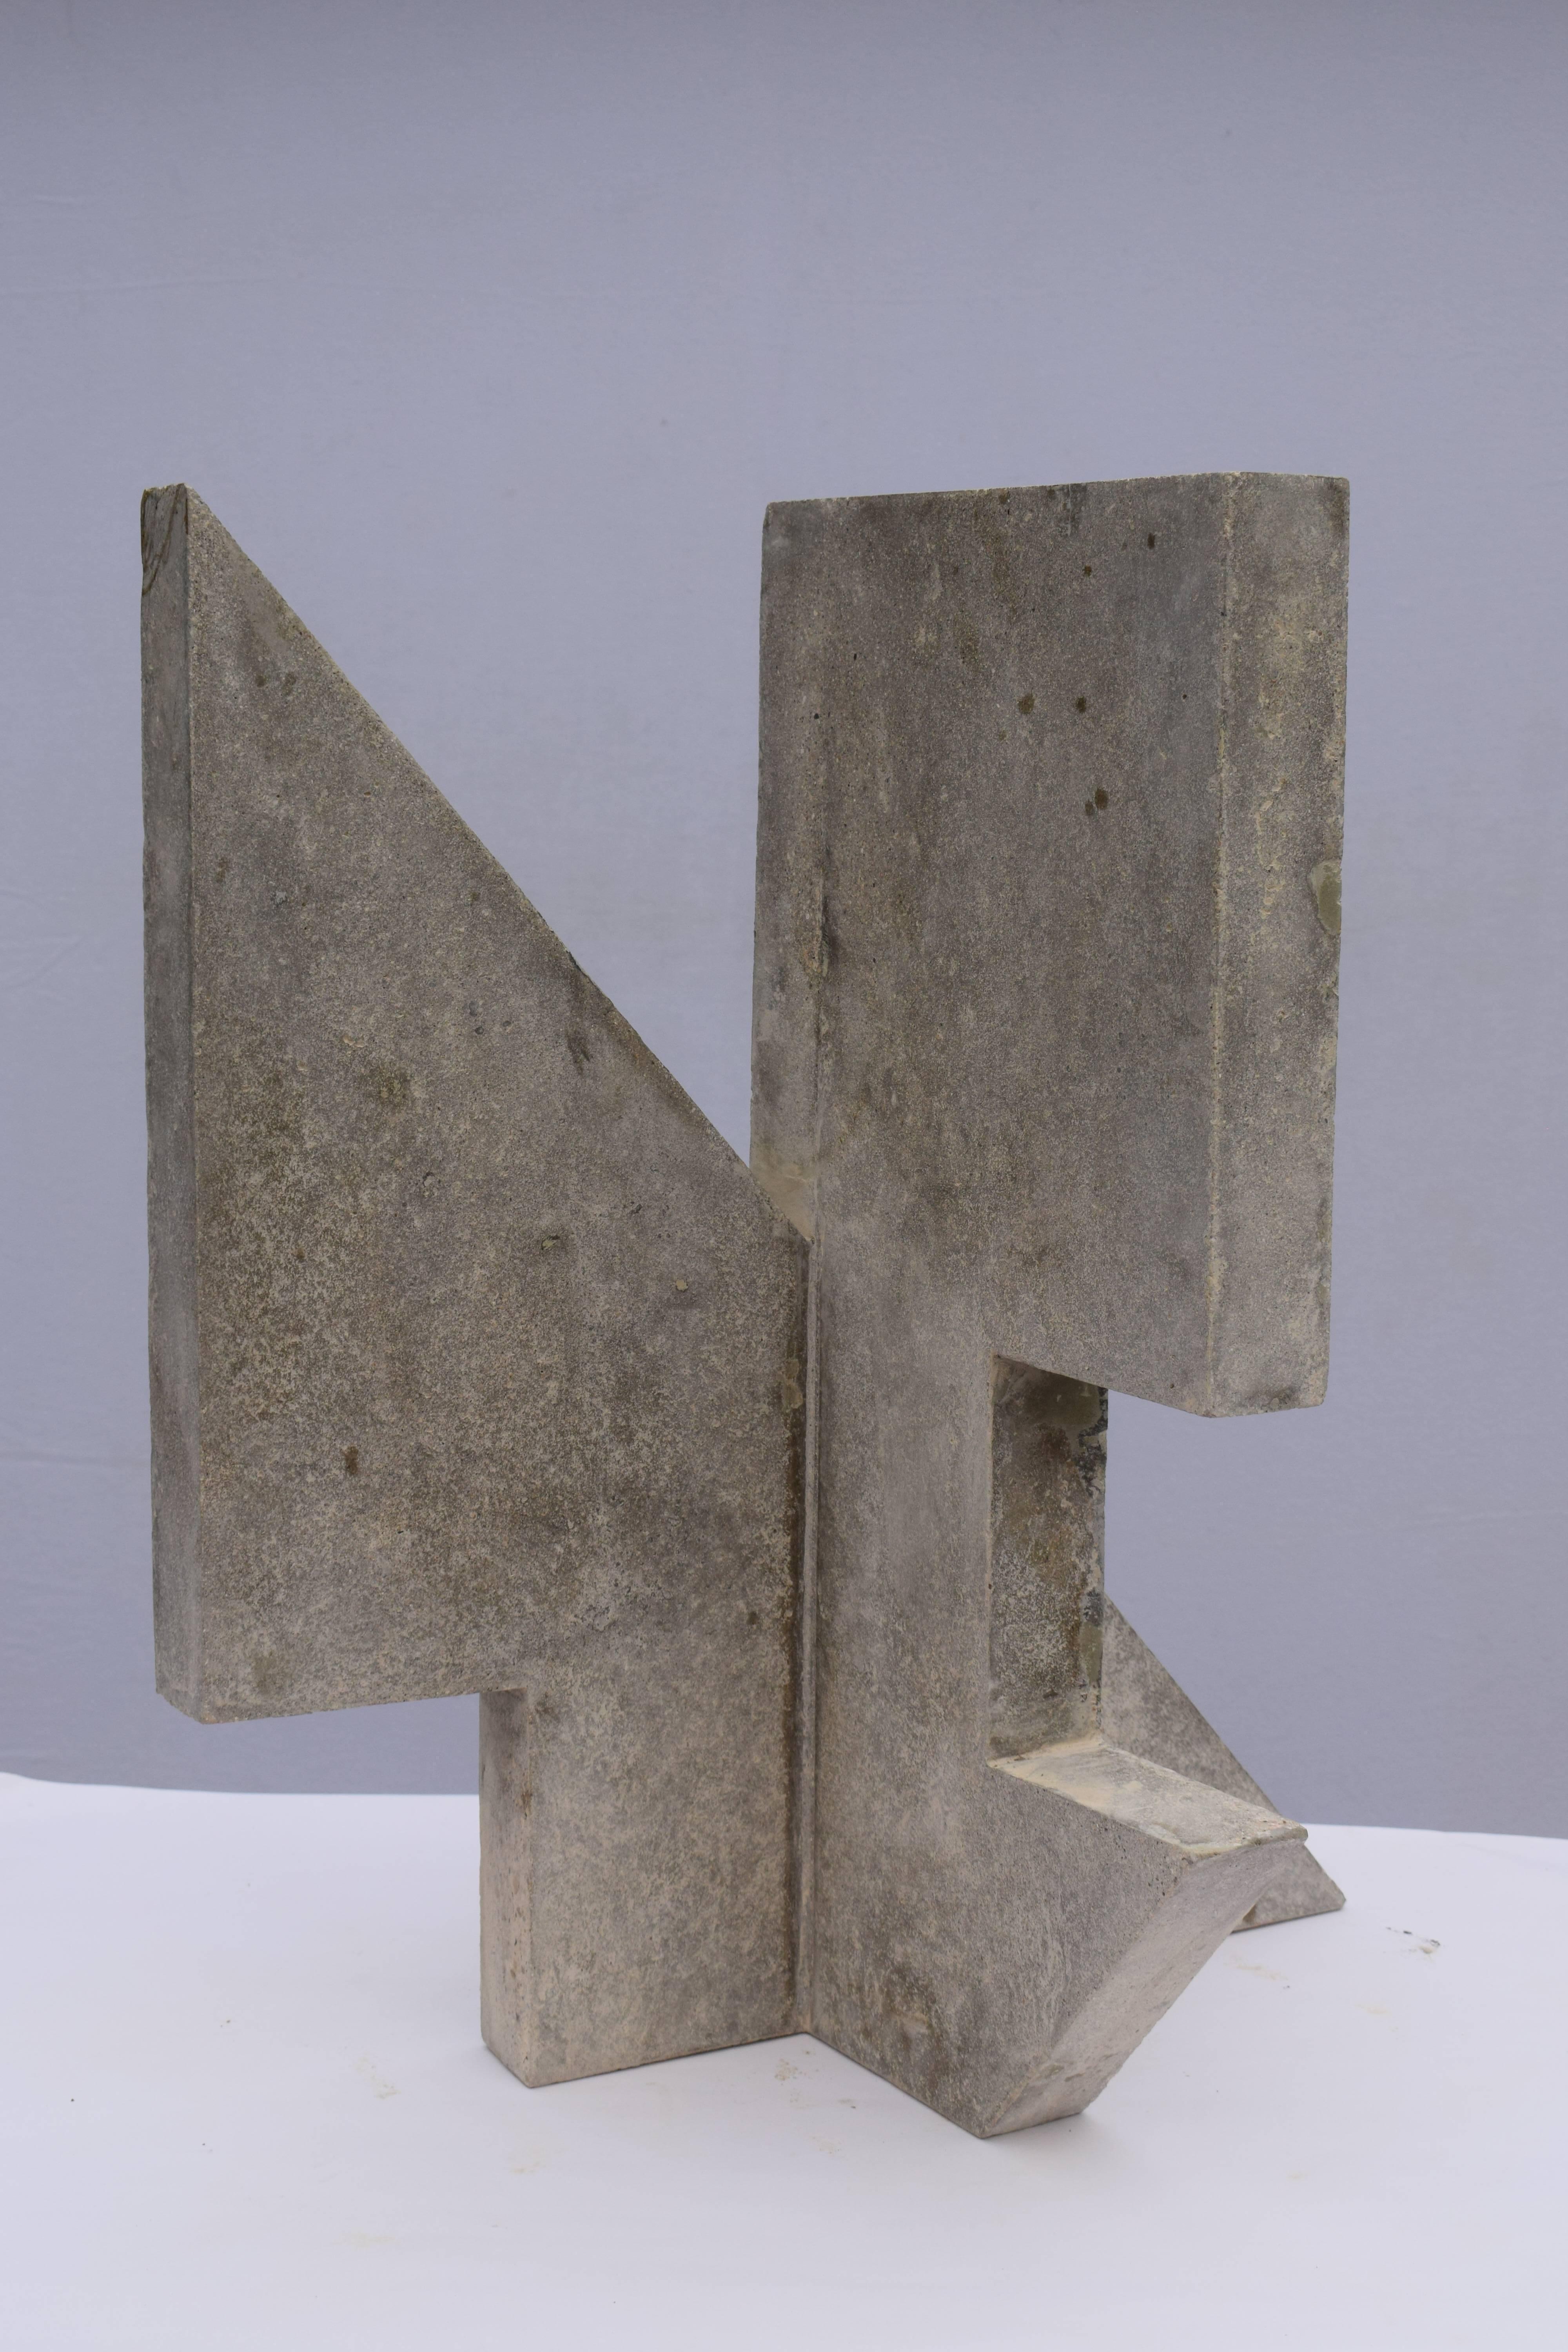 This is a cast concrete sculpture curated by Bask. The sculpture is 60cm high and 30cm wide. The thickness of the concrete is 5cm.

This is a new series of work by the London based sculpture collective Bask.
The series was realised during a